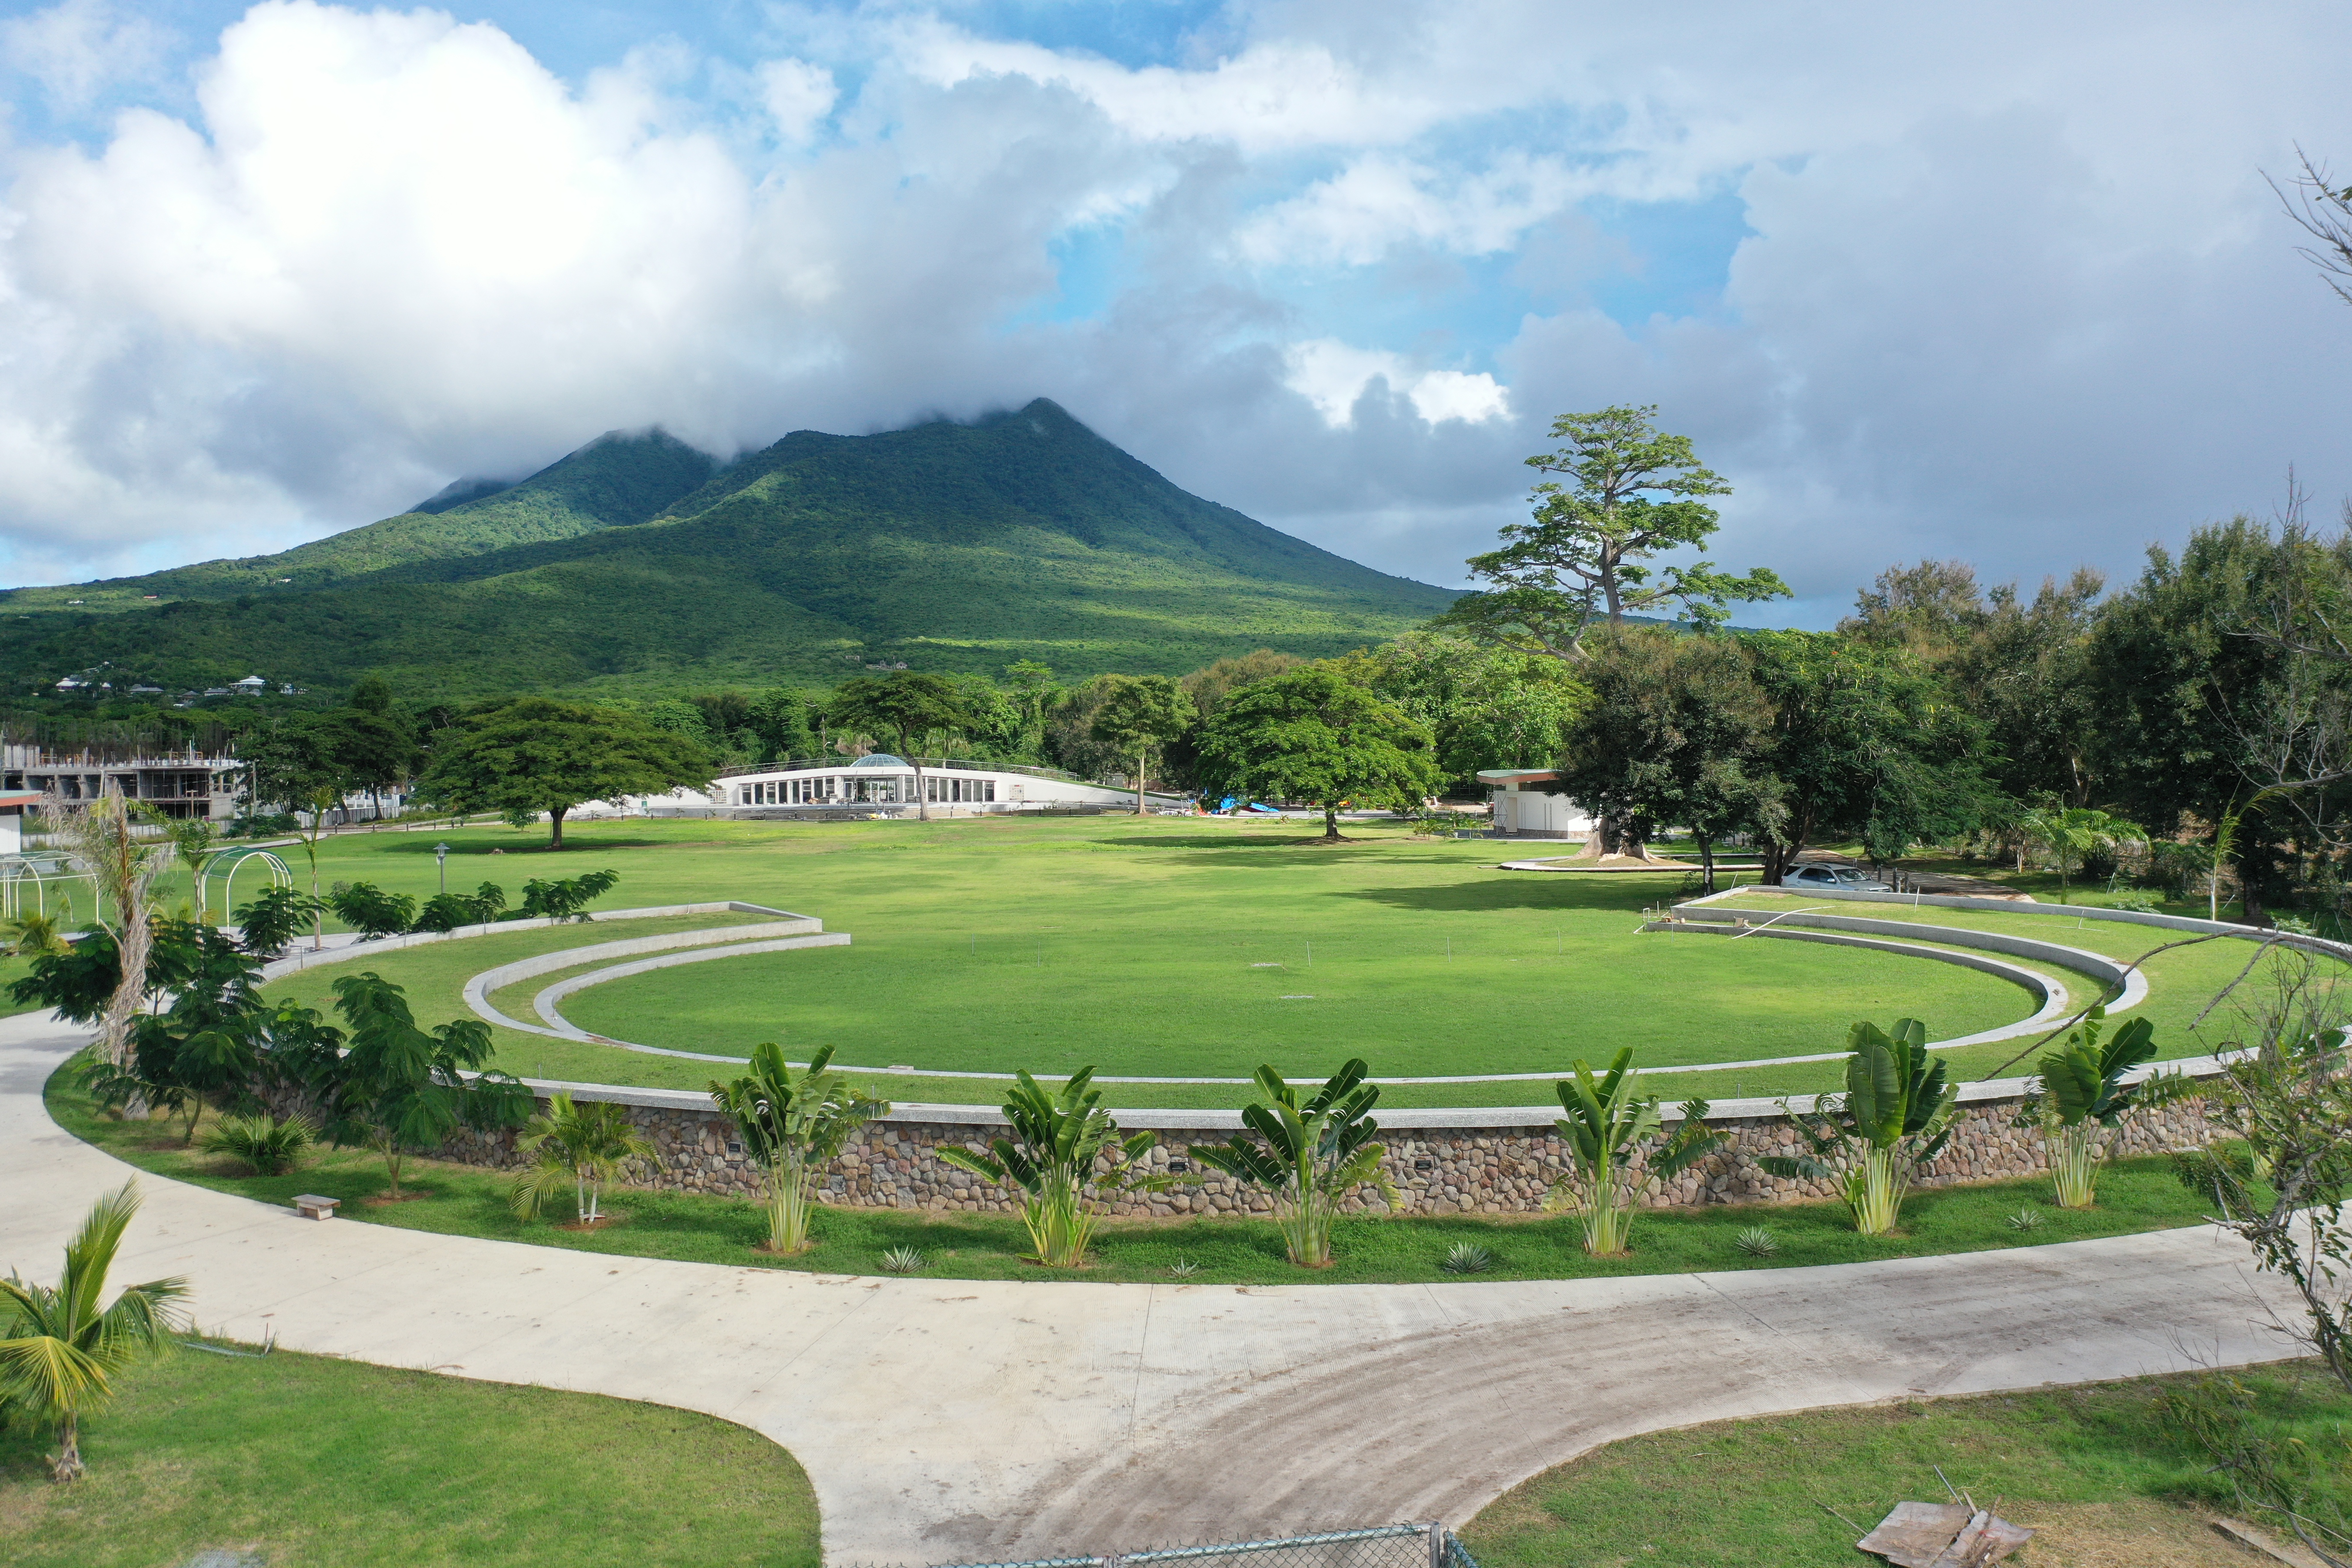 St. Kitts and Nevis Pinney’s Beach Park Project